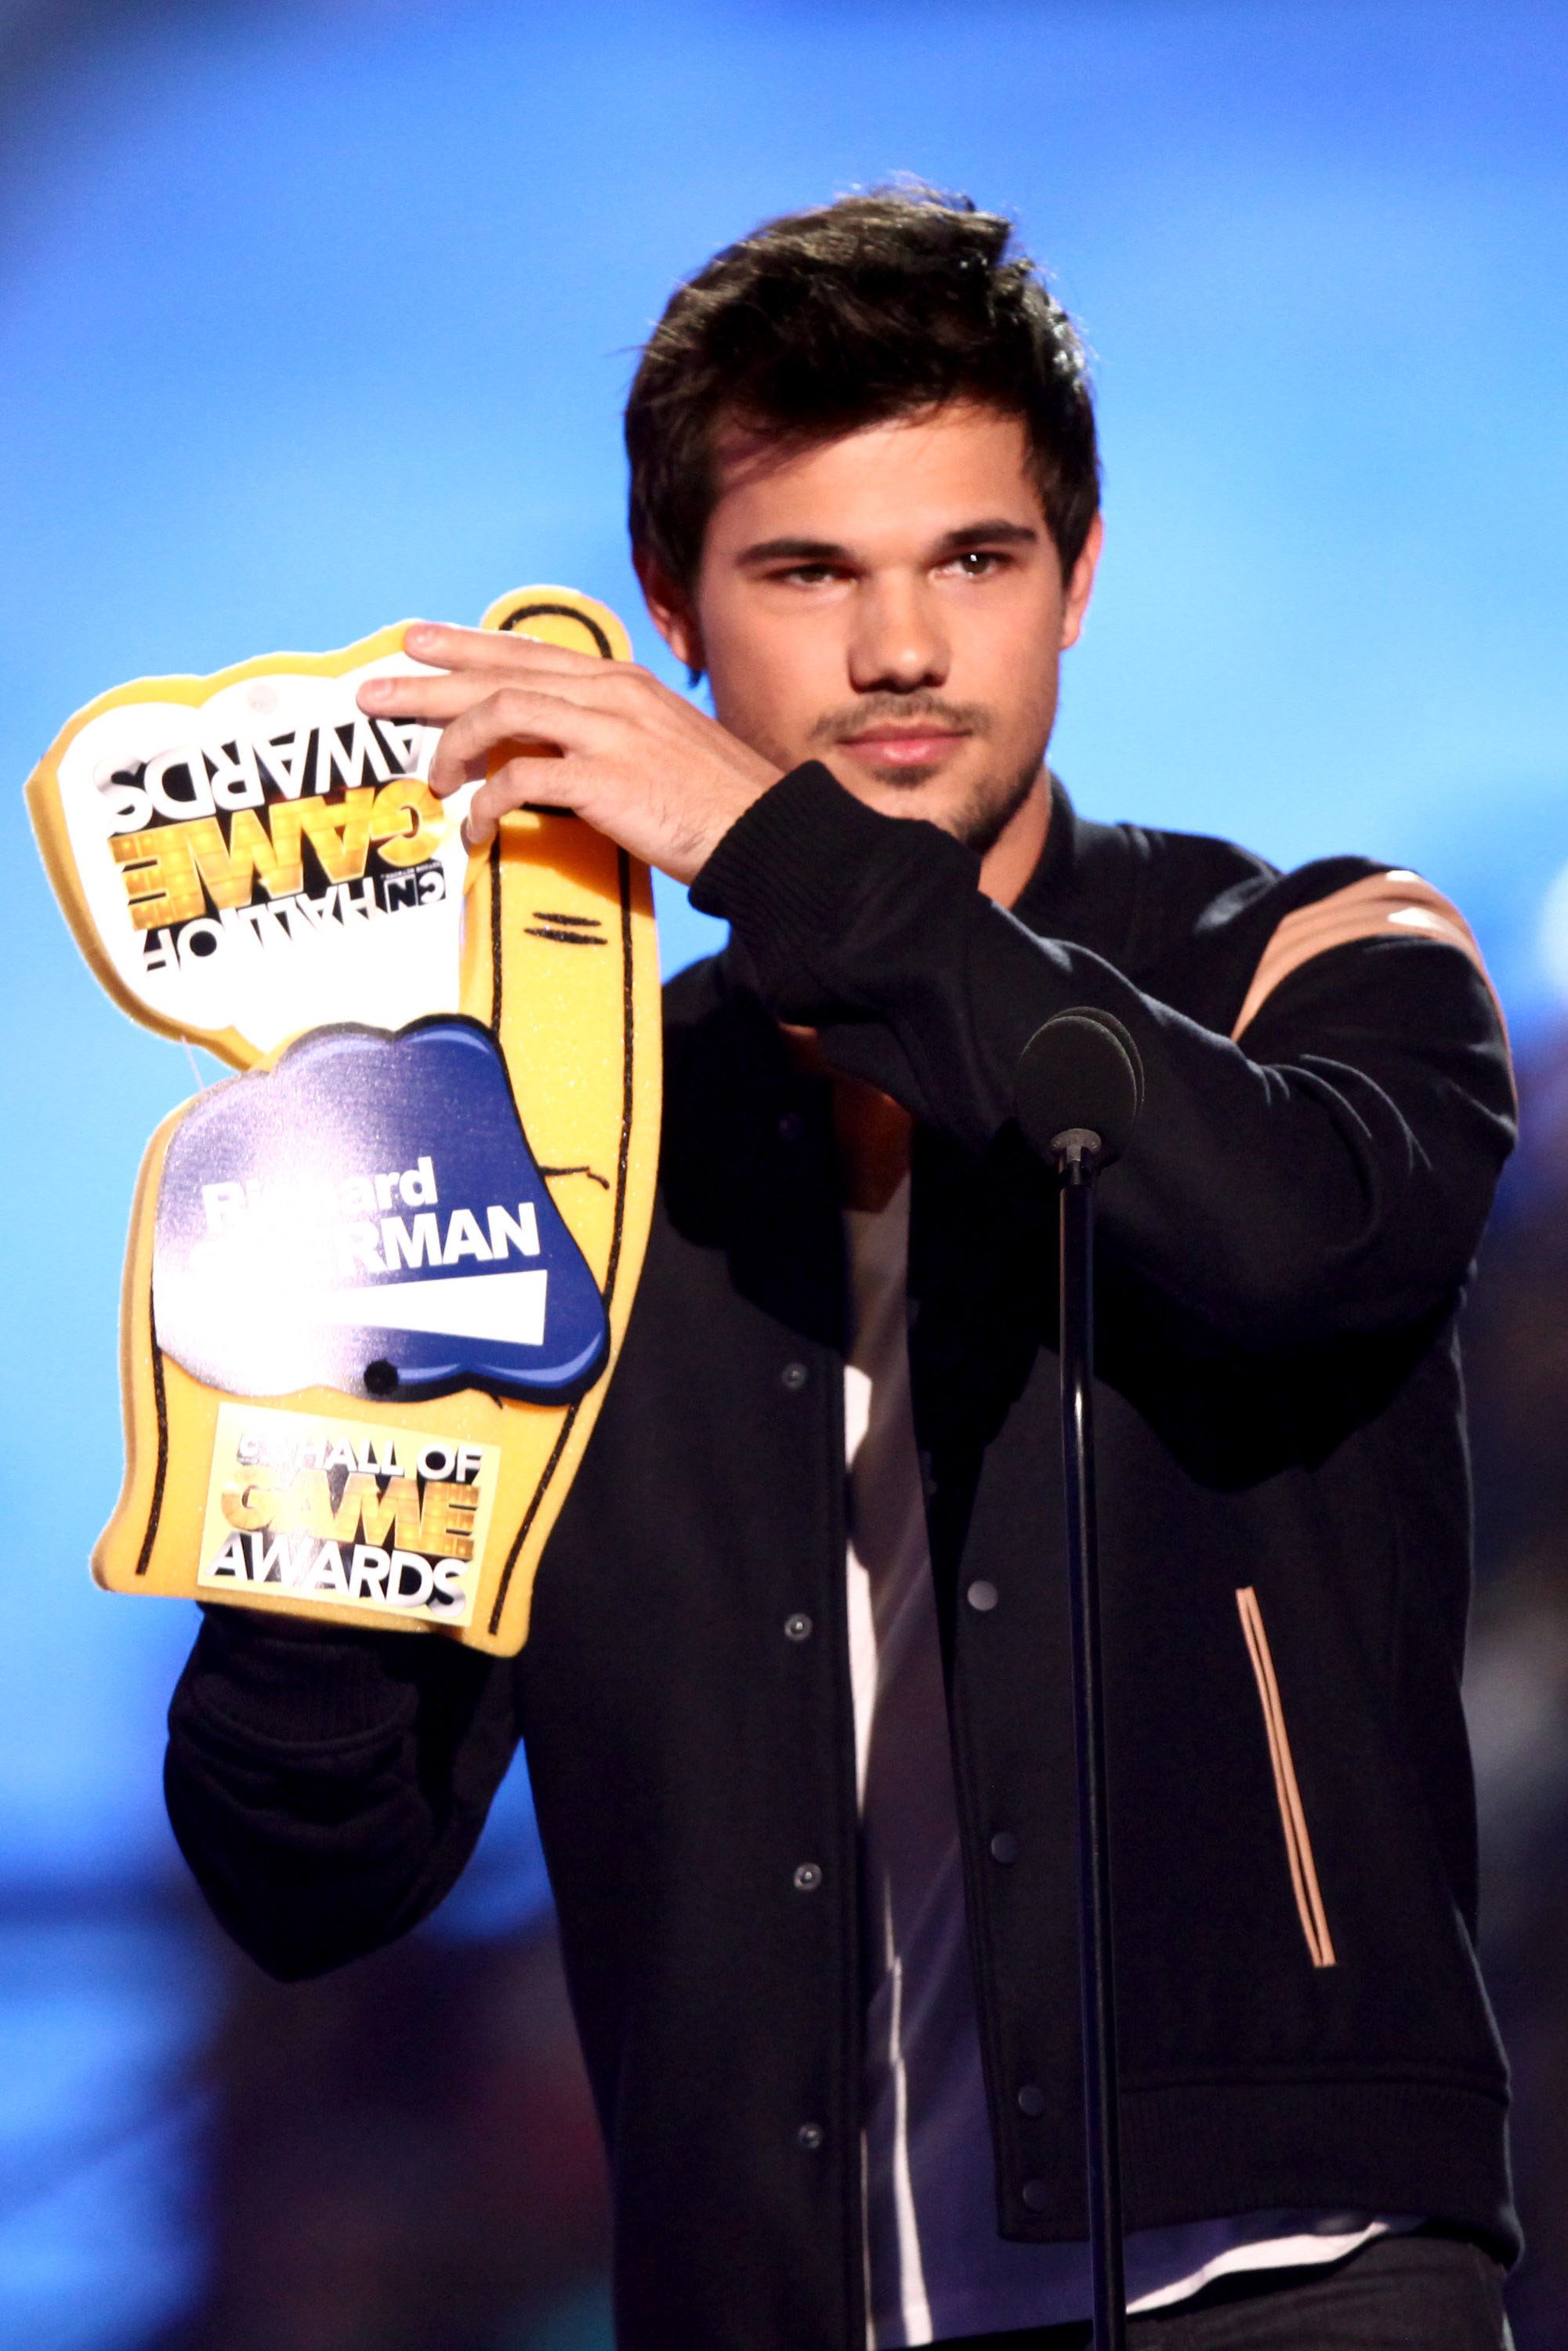 Tyler onstage with an award